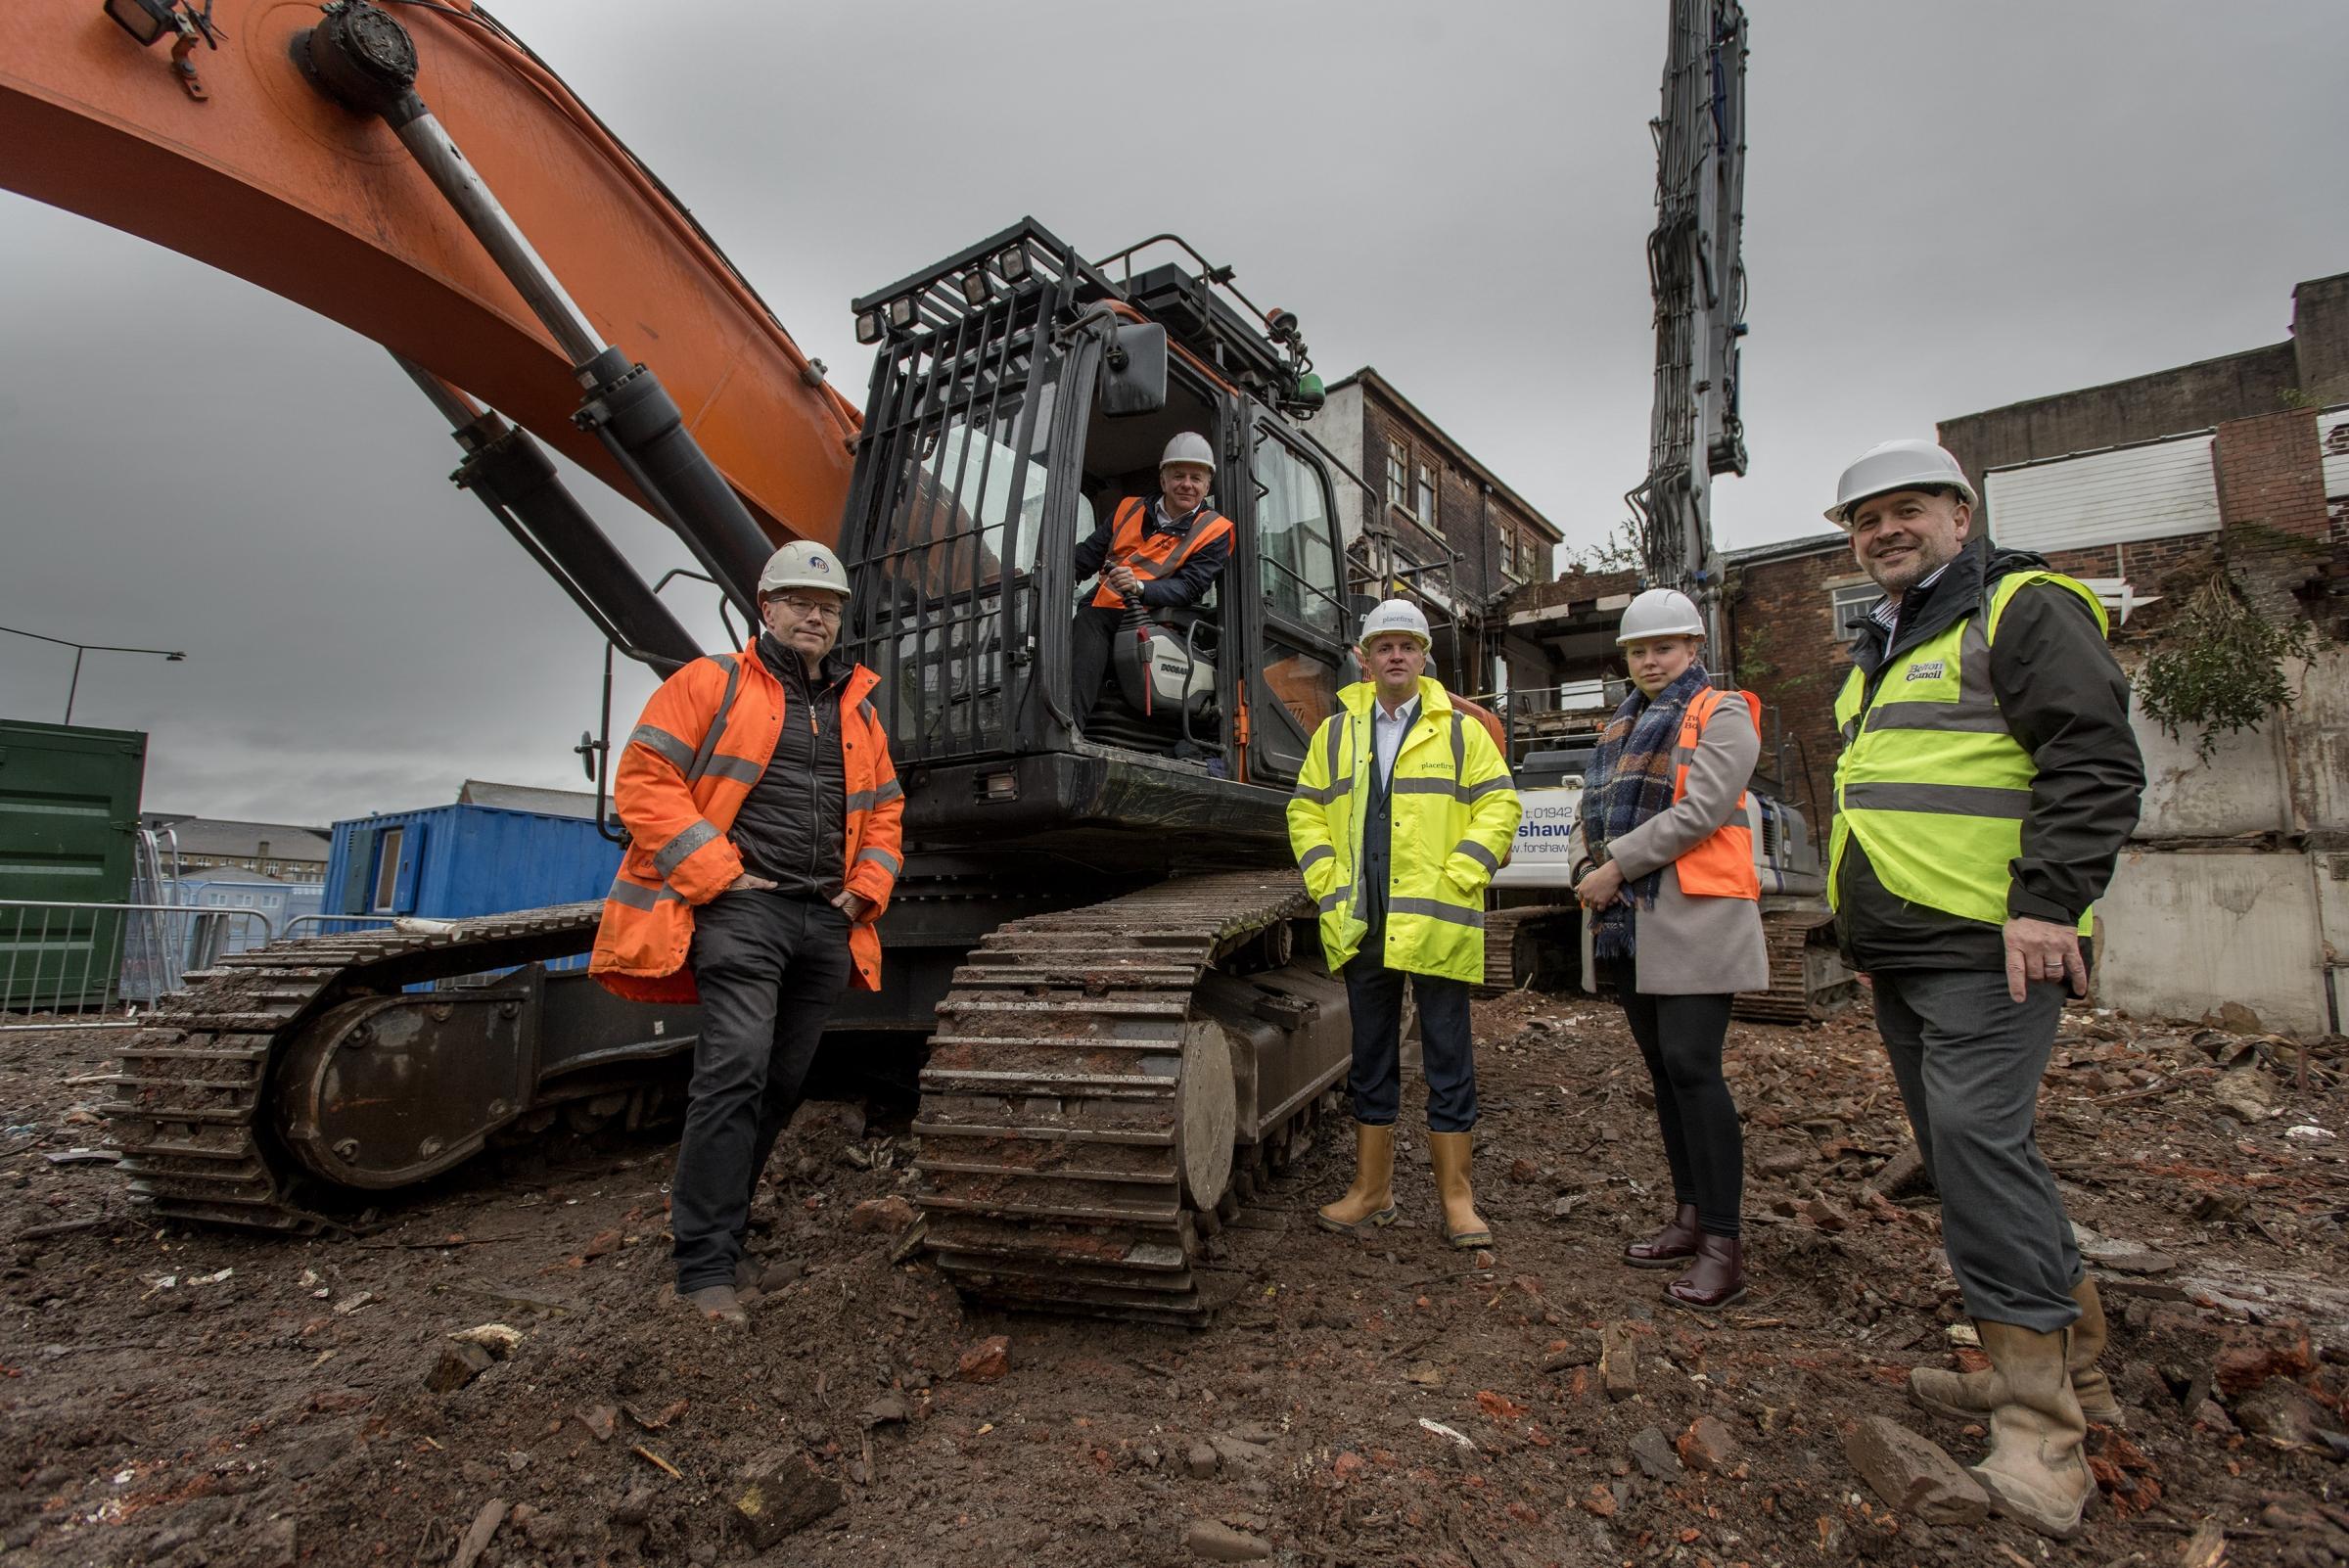 Demolition work continues on the new Central Street housing development off Deansgate, Bolton. Picture by Paul Heyes, Tuesday October 26, 2021.Chris Forshaw (Forshaw Demolition), Cllr Martyn Cox, Darran Lawless, Cllr Adele Warren, Paul Whittingham